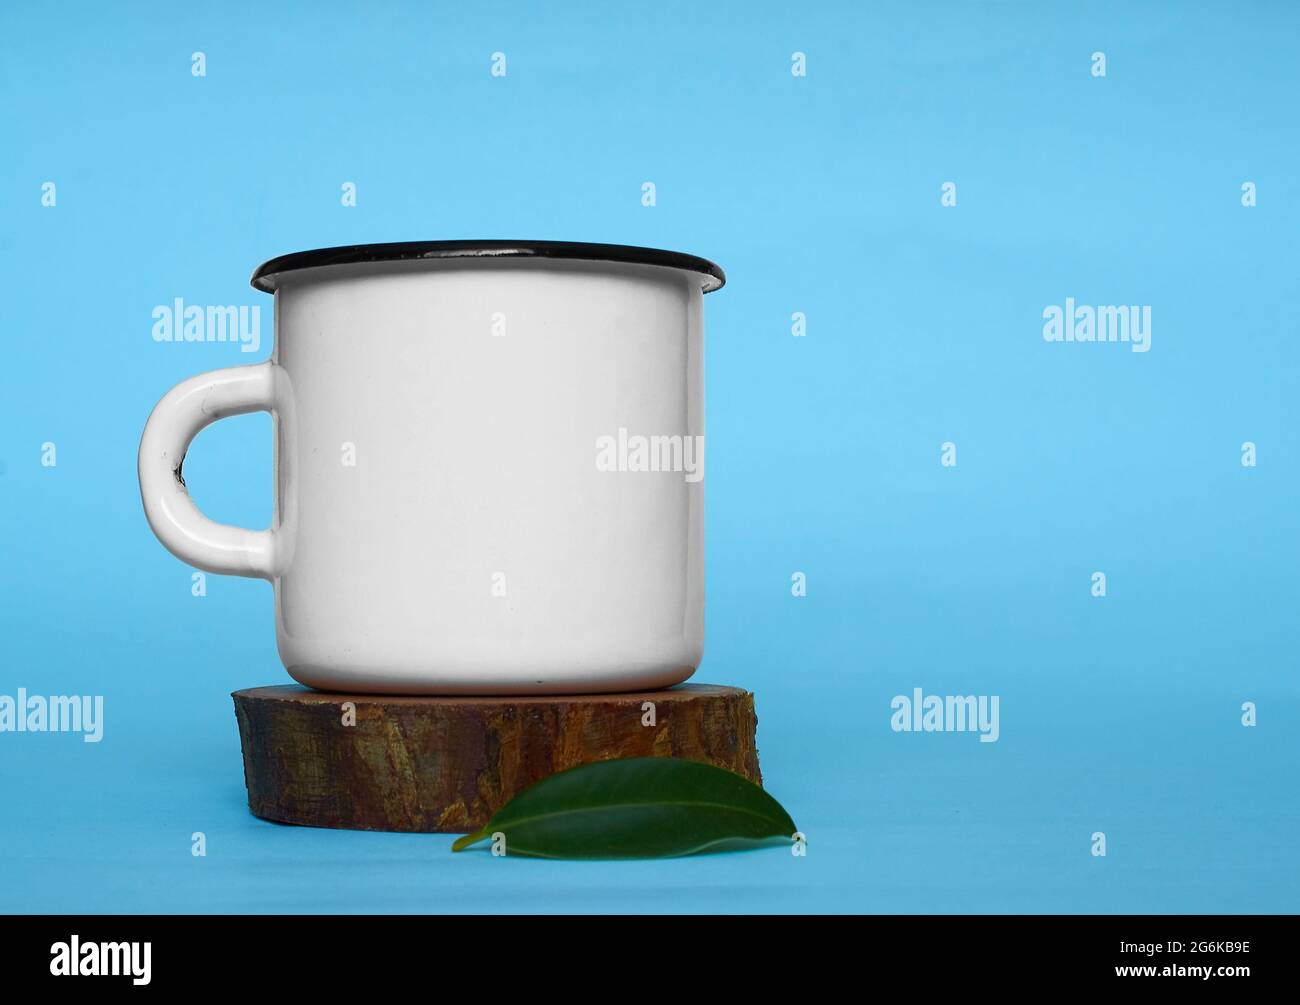 A white metal mug and a green ficus leaf on a wooden stand  Stock Photo